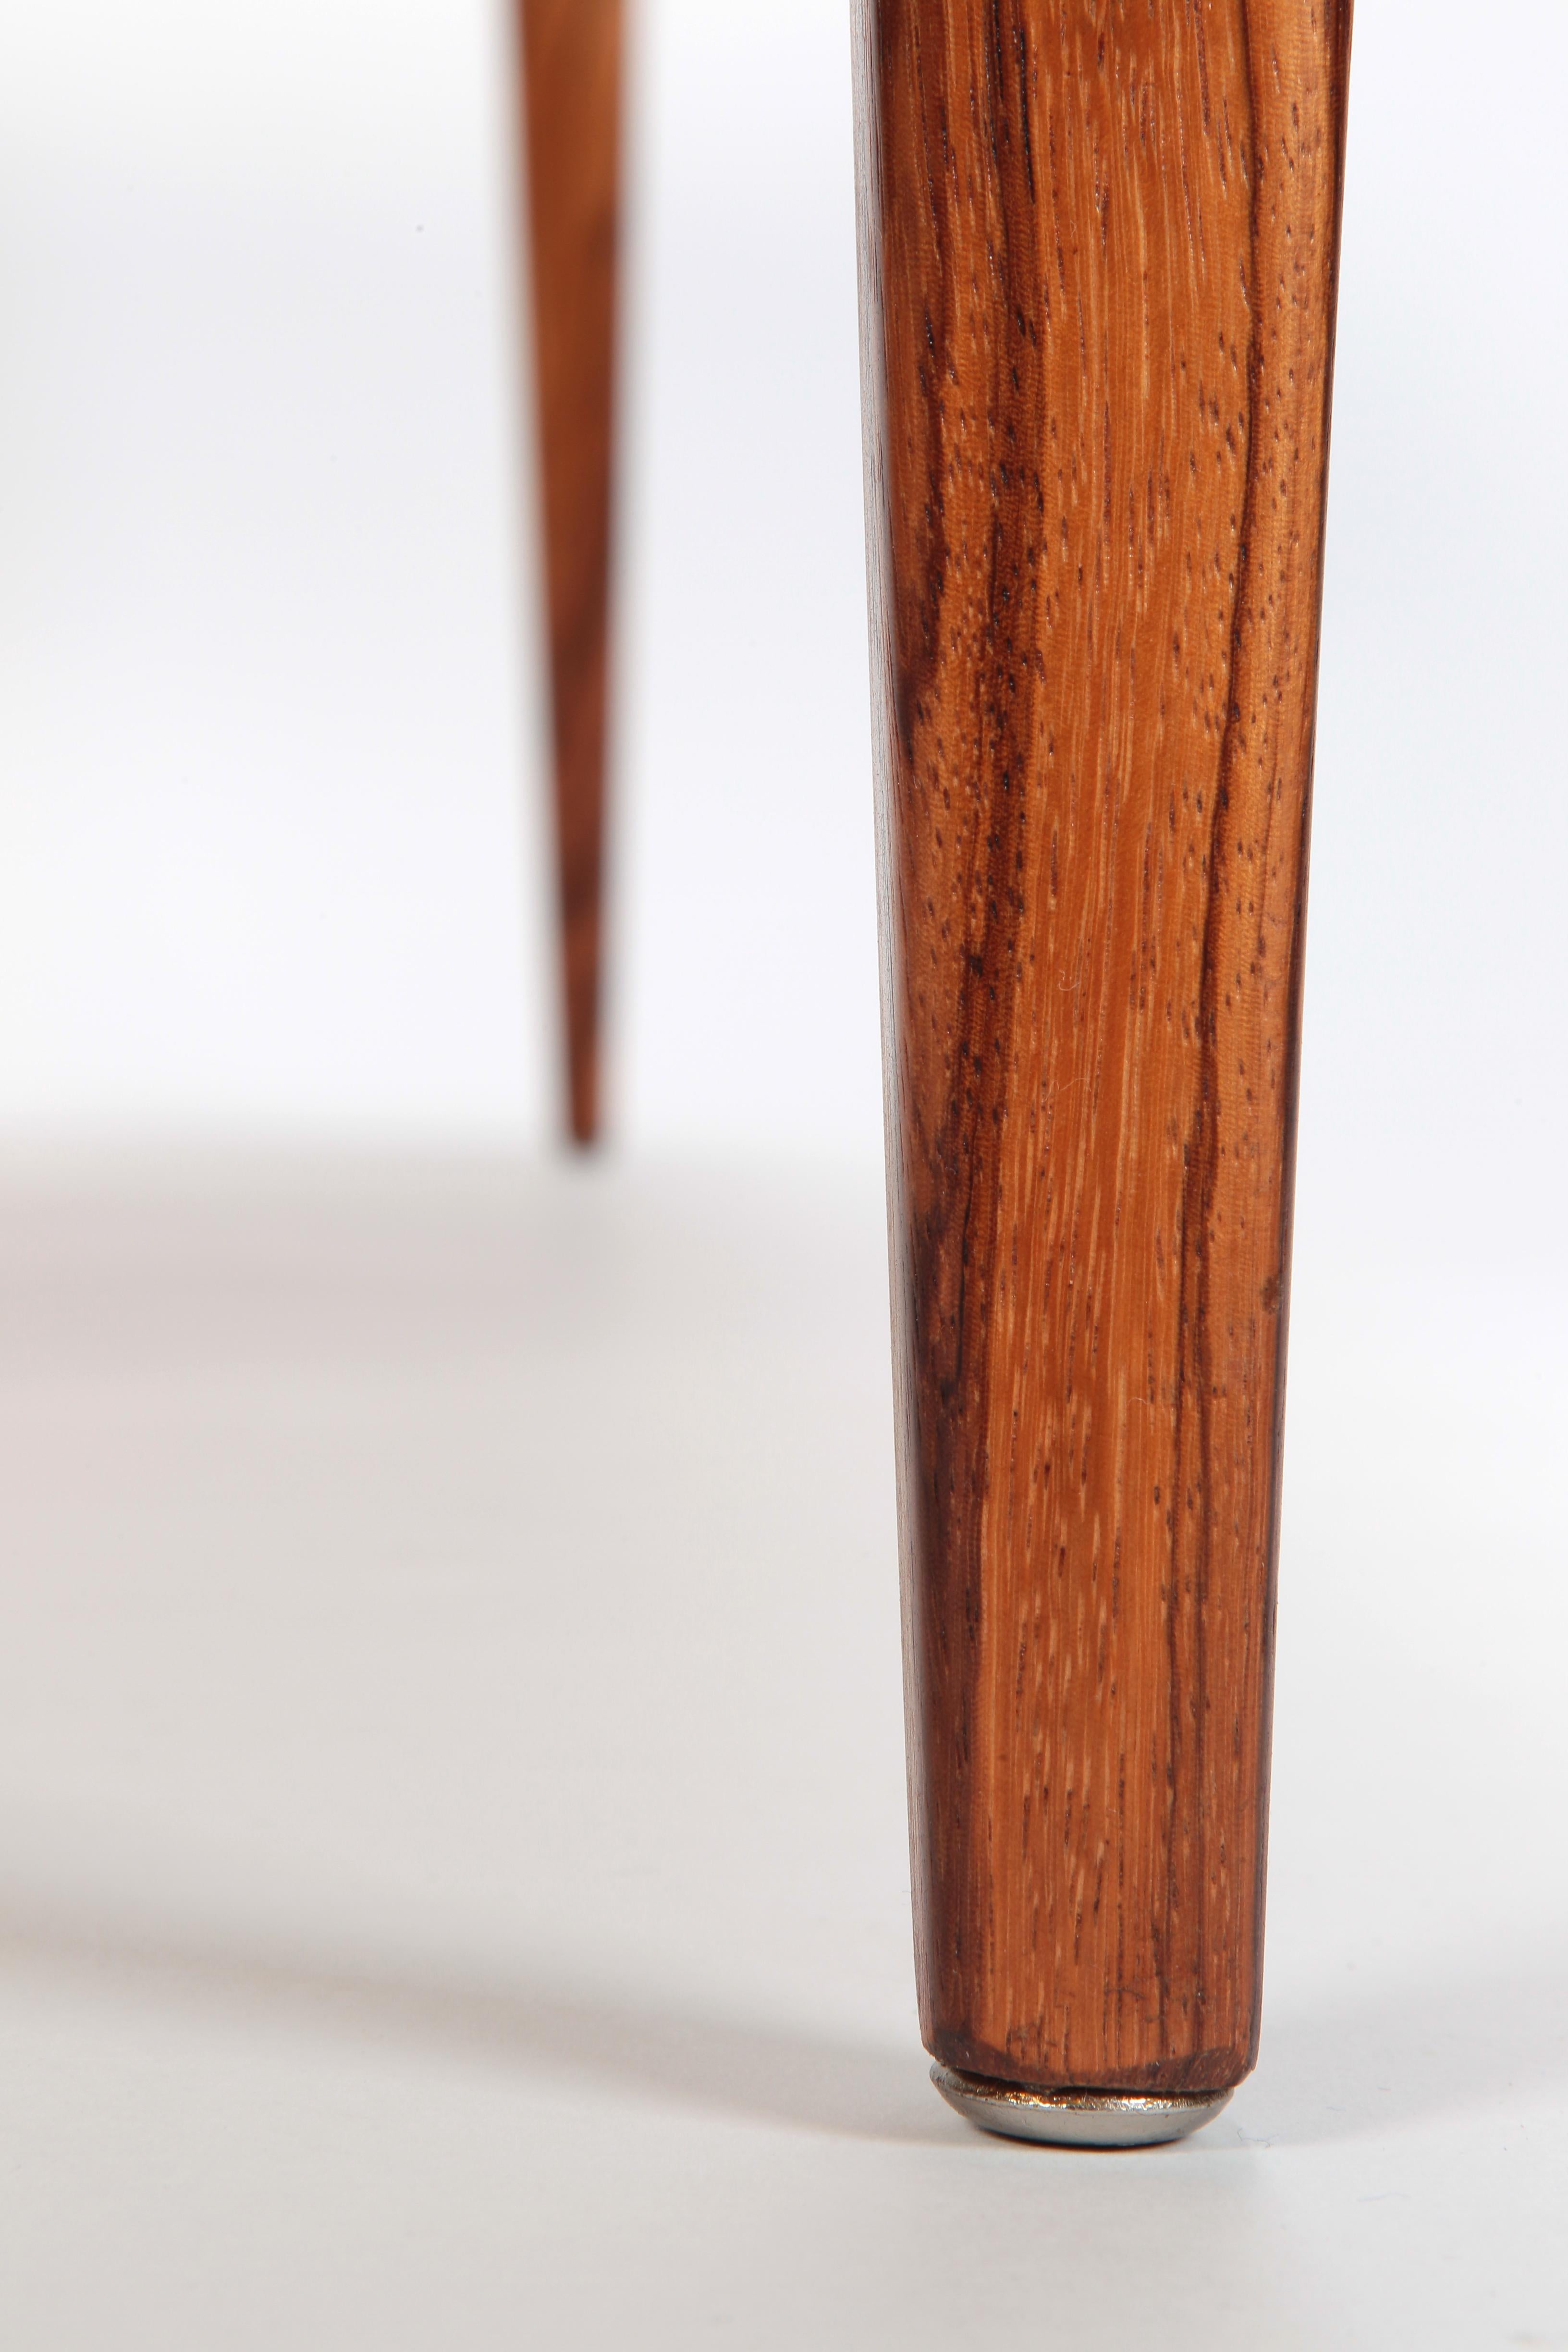 Rosewood Erling Torvits Coffee Table Heltborg Møbler, 1960s For Sale